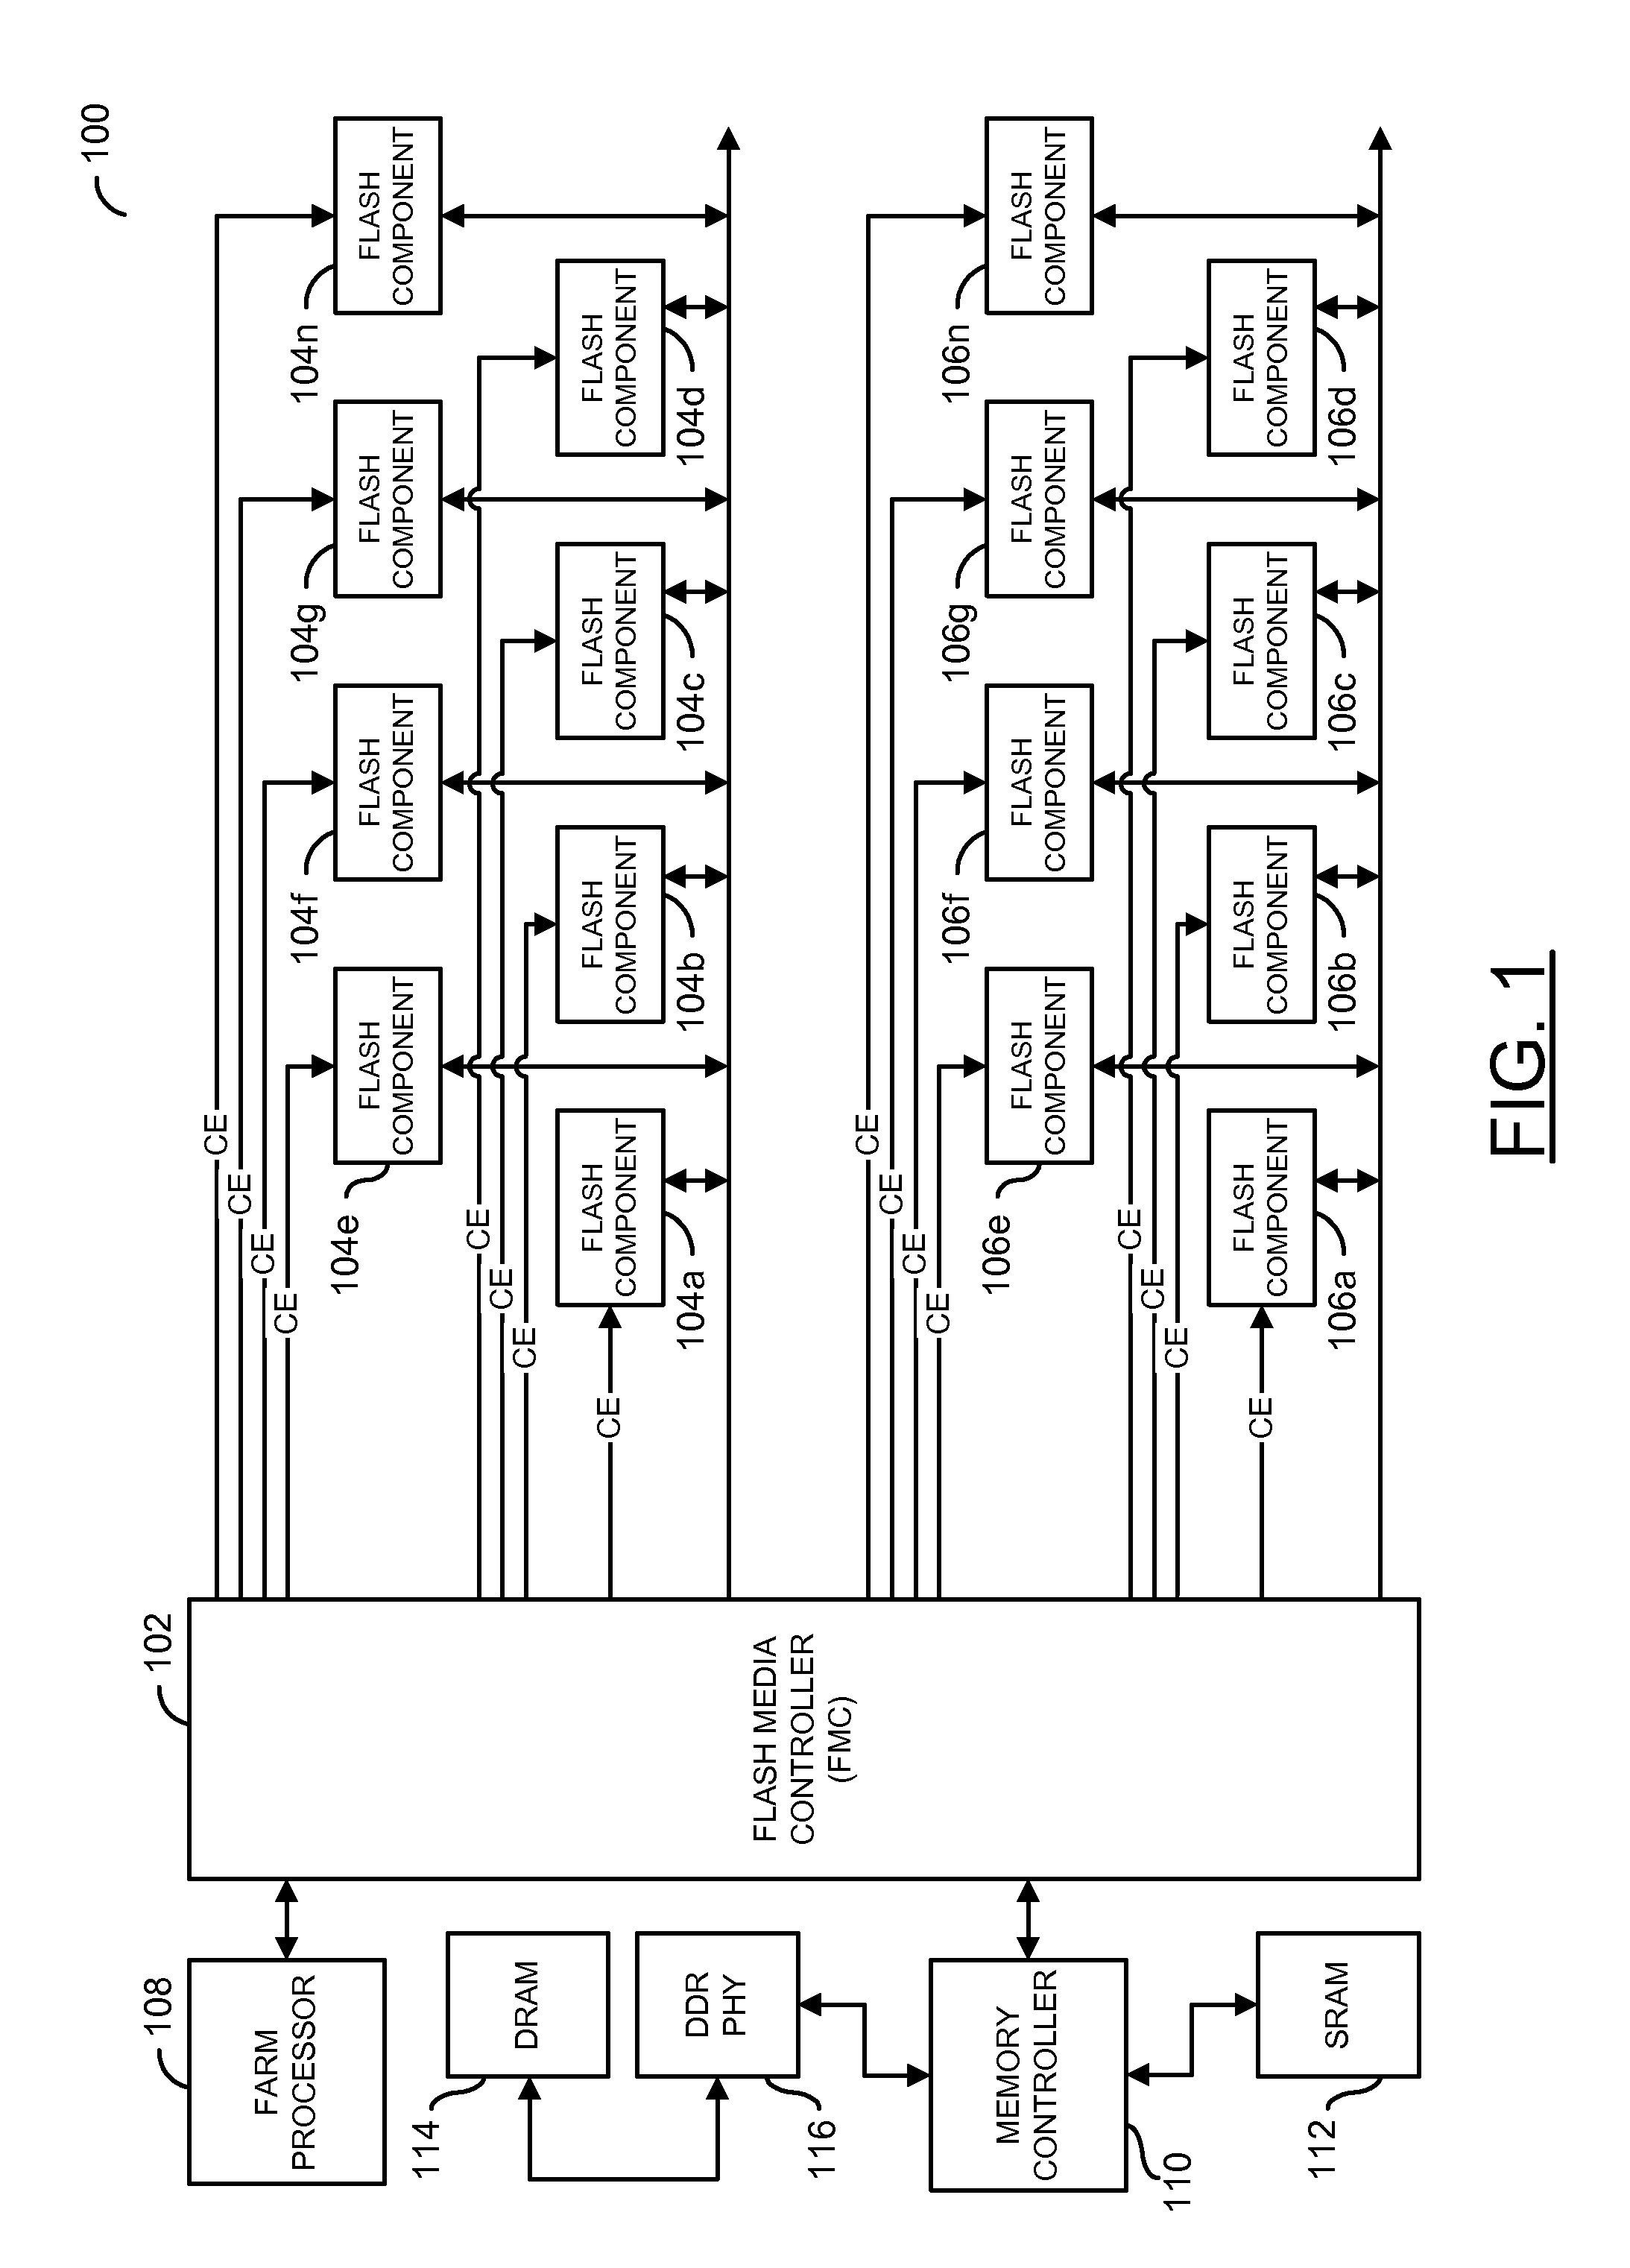 Flash controller hardware architecture for flash devices